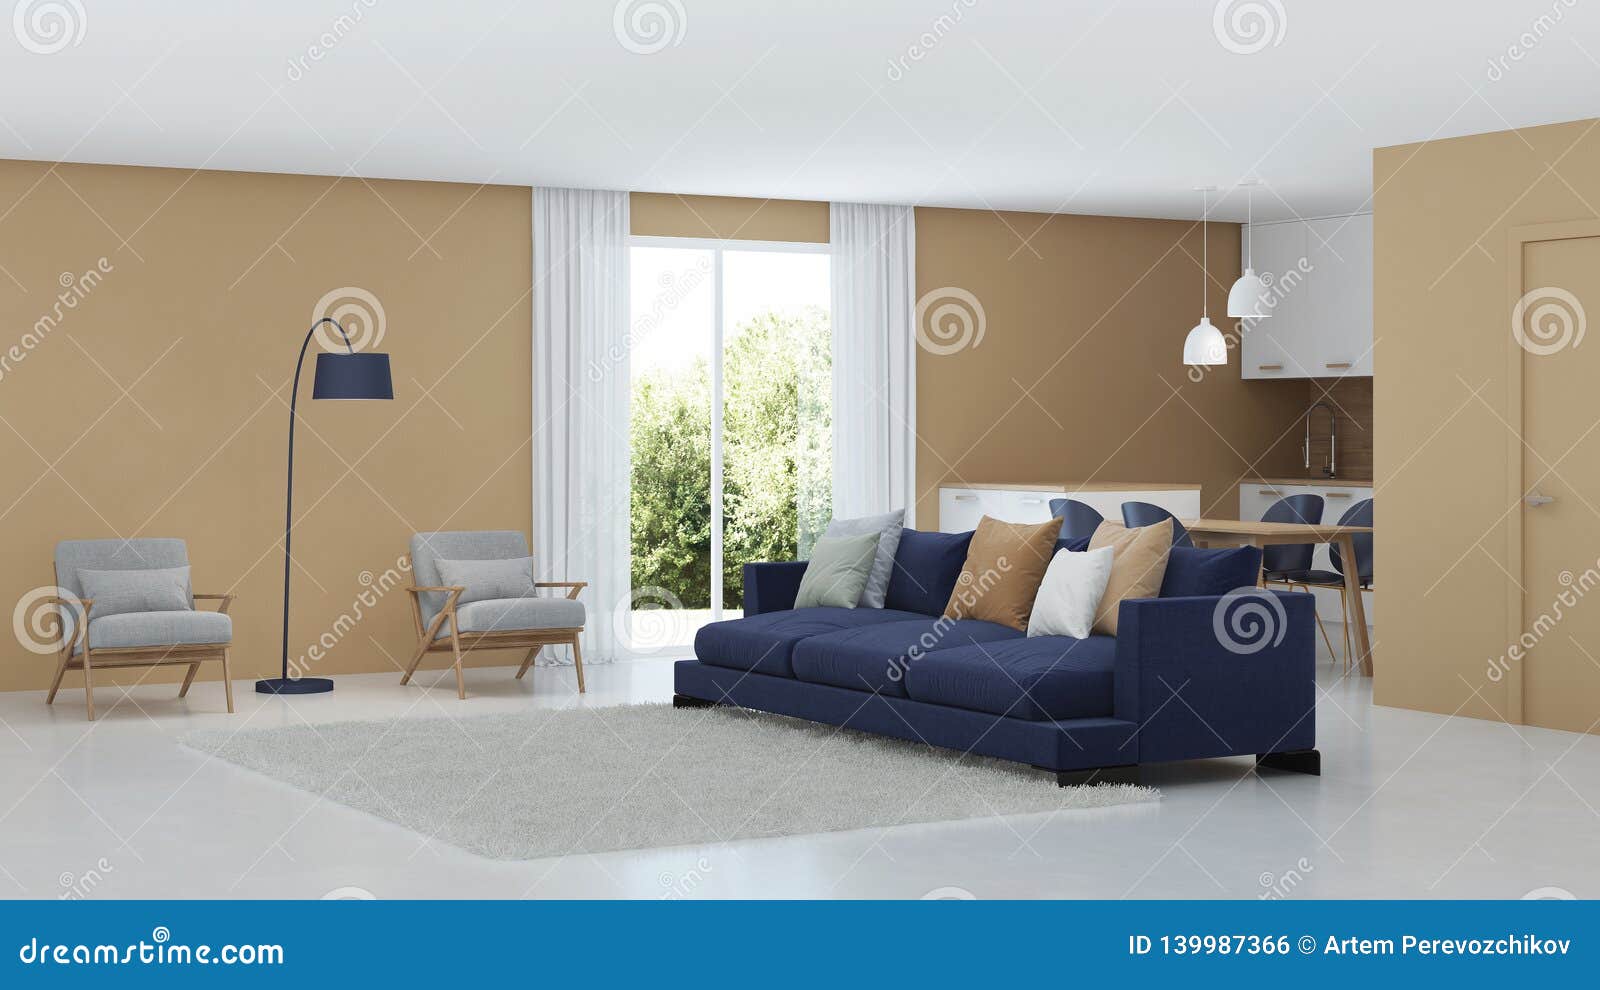 Modern House Interior Warm Color In The Interior Stock